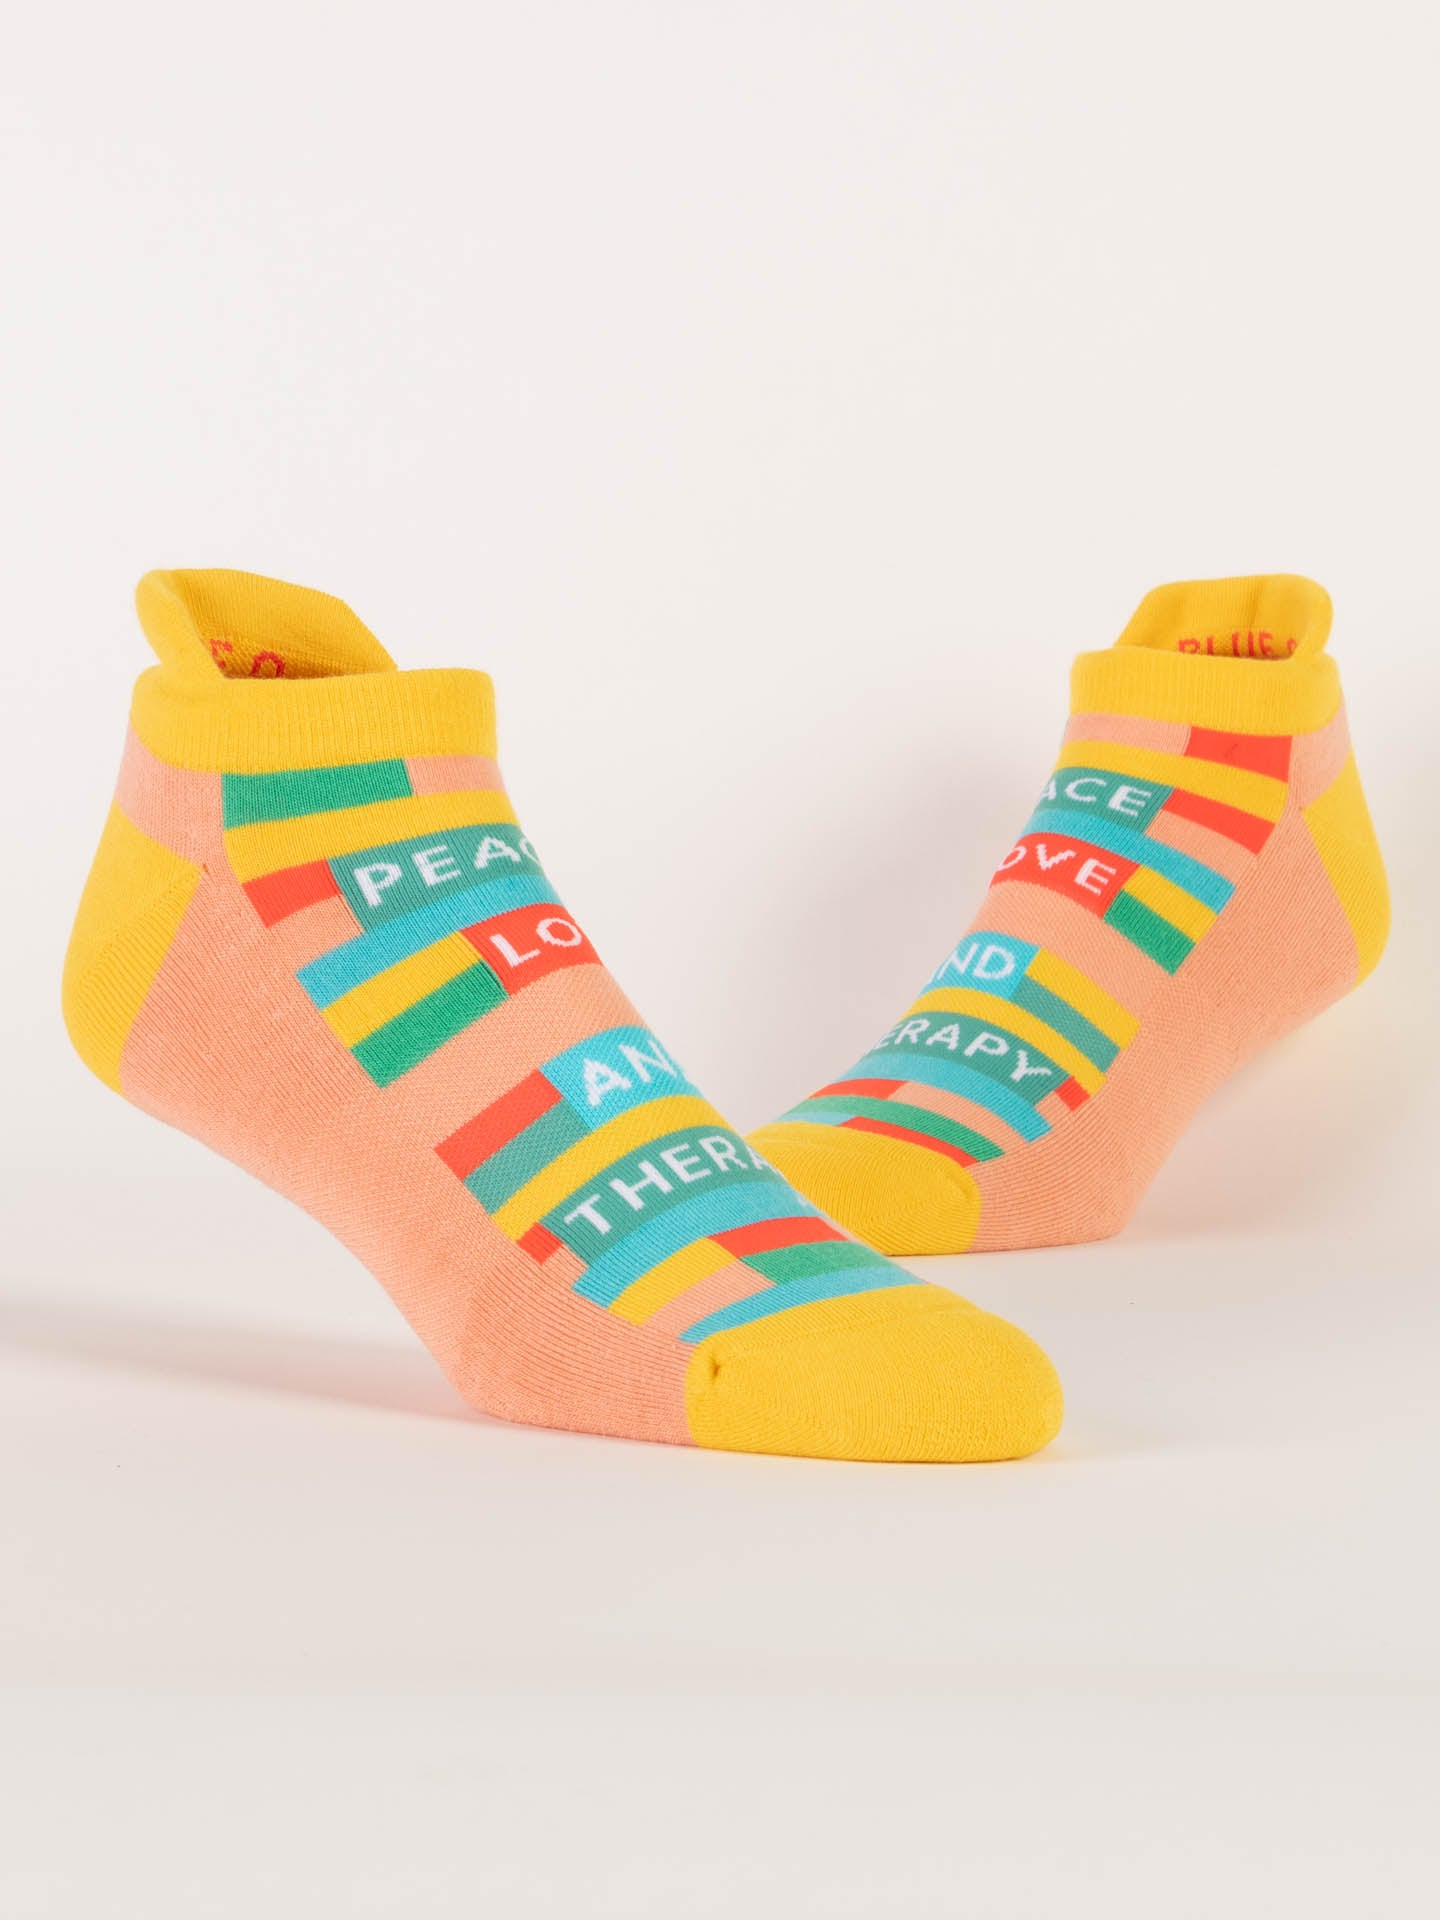 Blue Q - Peace, Love and Therapy Sneaker Socks